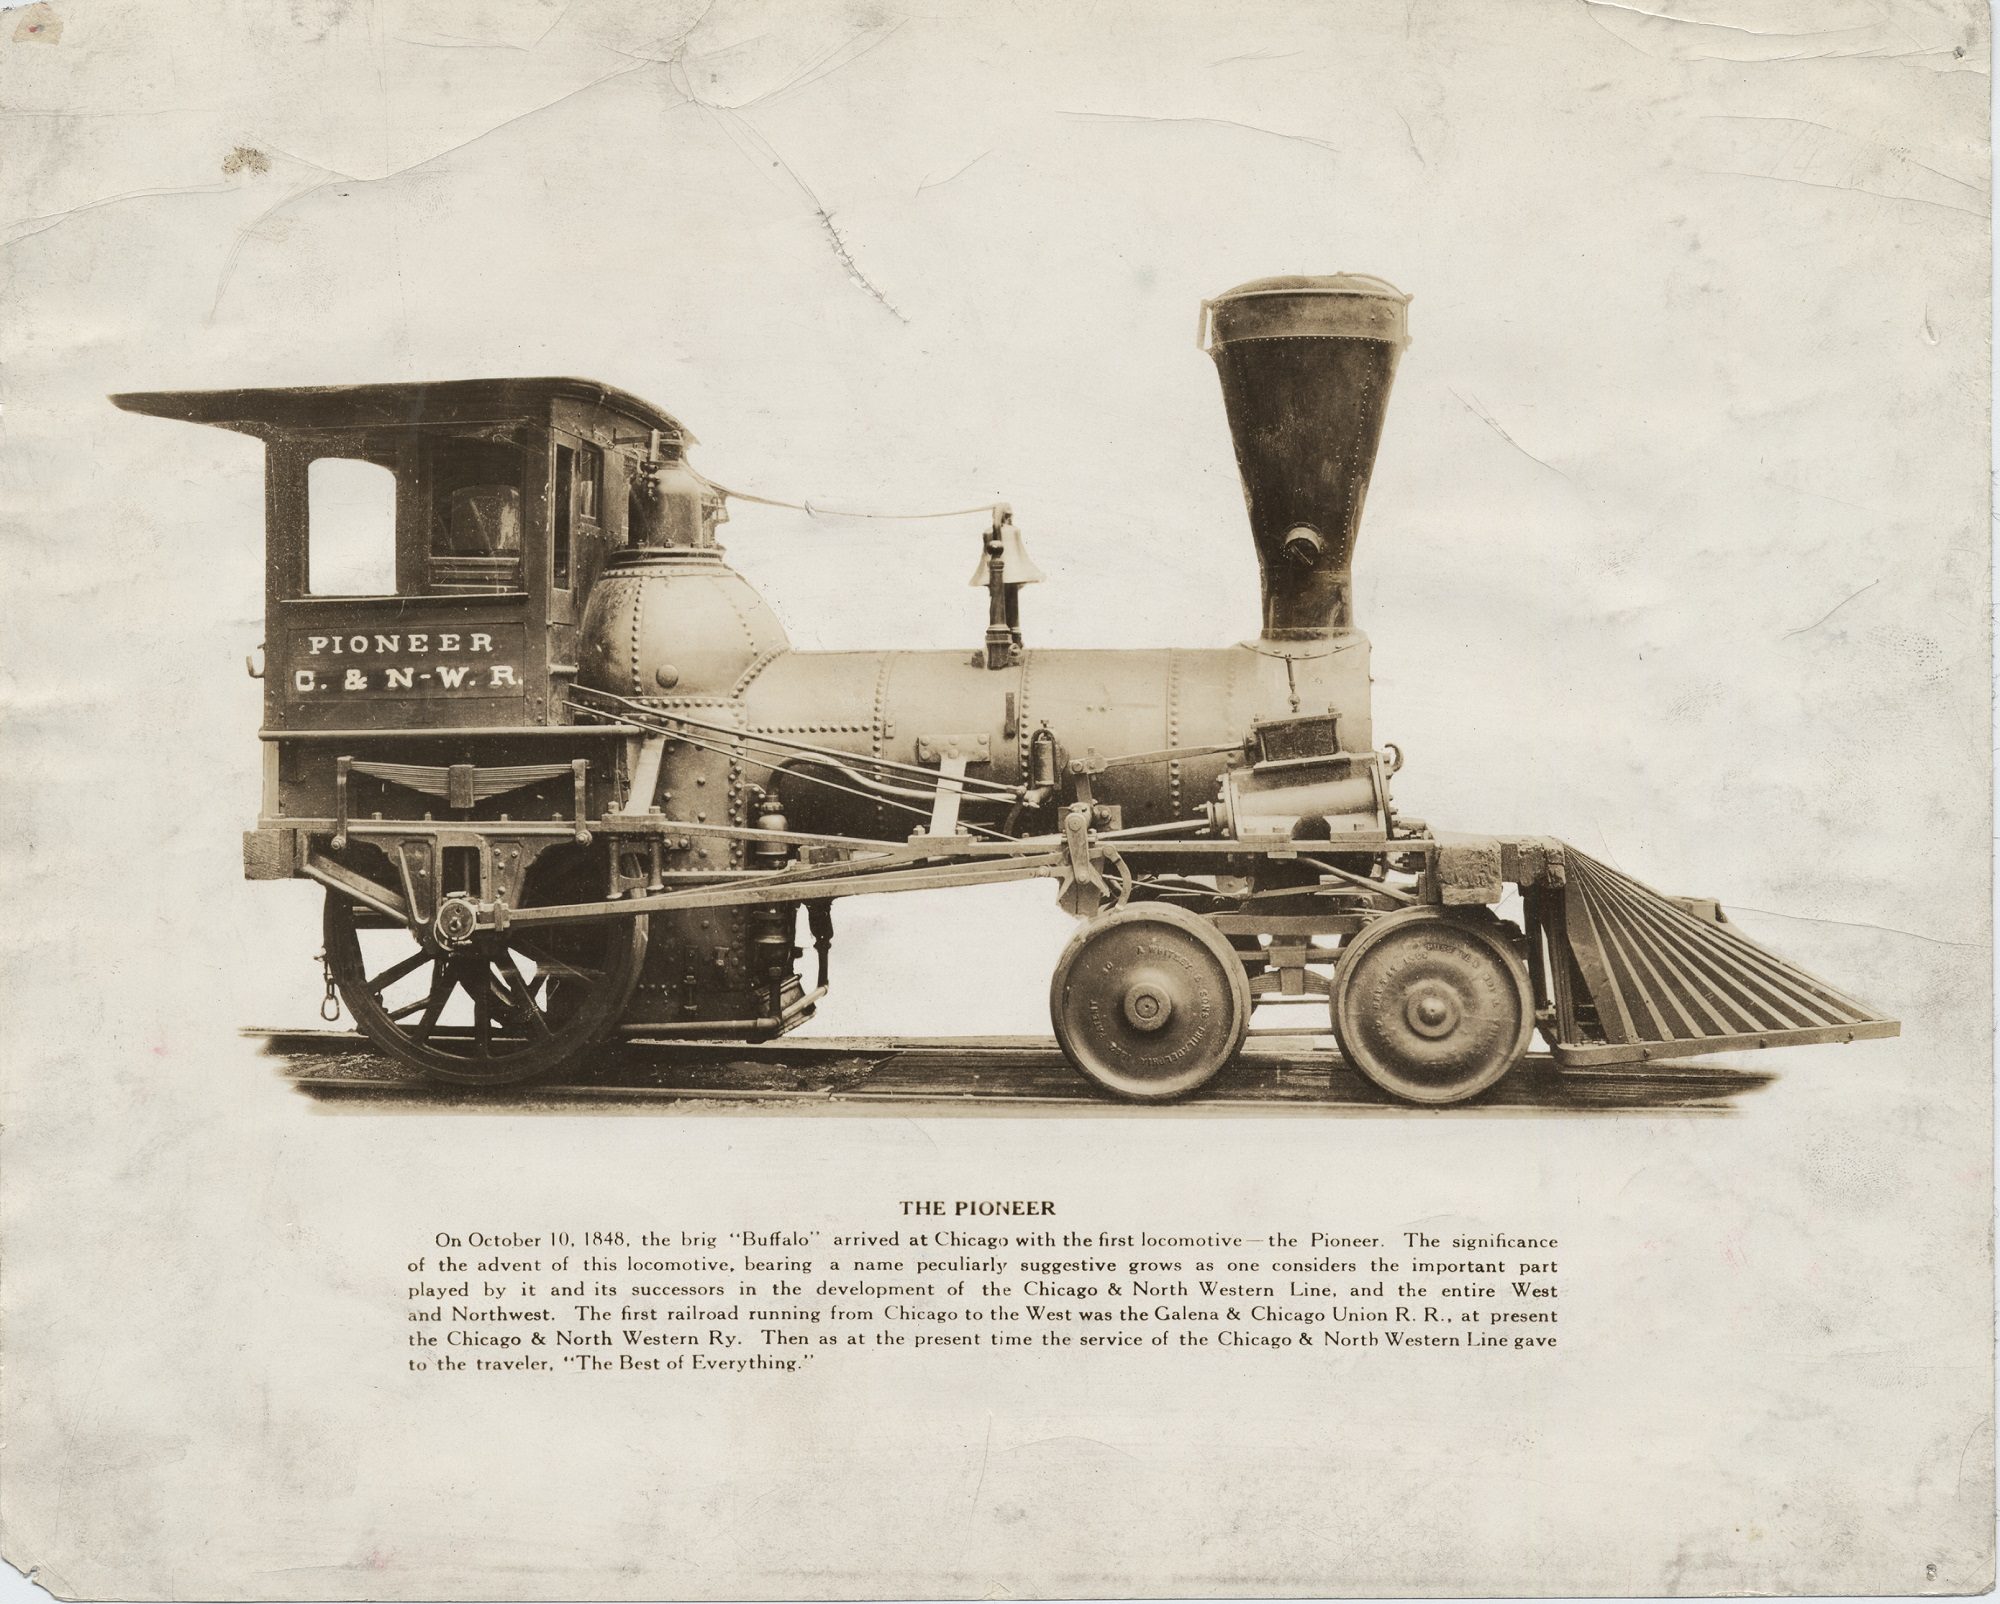 The Pioneer locomotive, the first locomotive, arrived in Chicago in 1848.